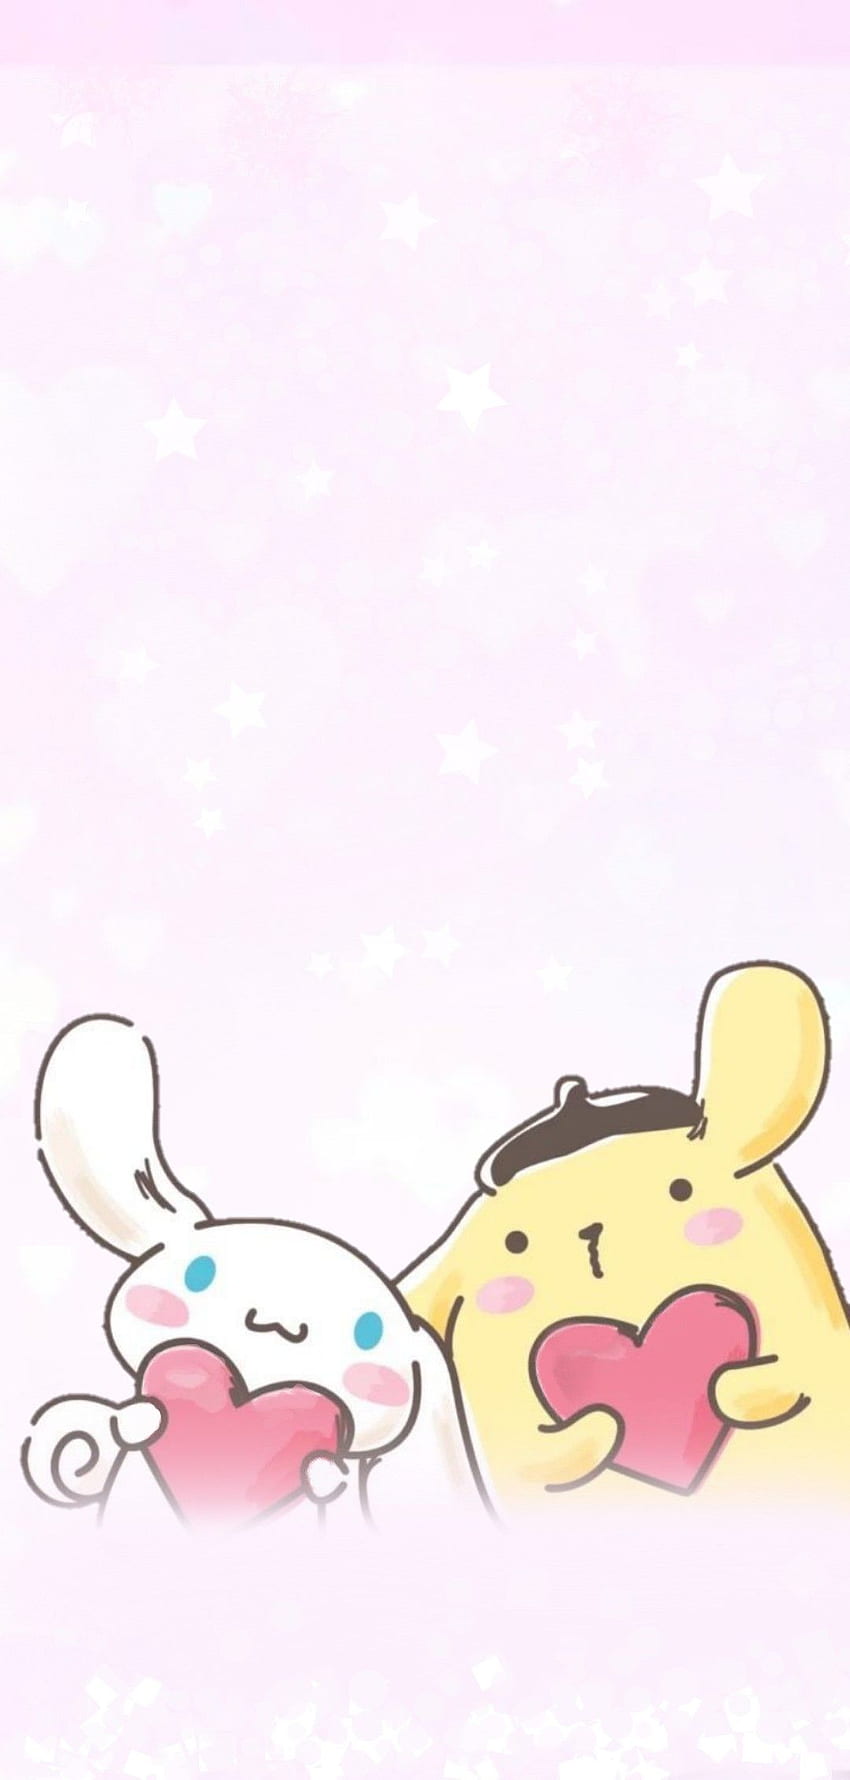  Be Positive   POMPOMPURIN WALLPAPERS From Pinterest